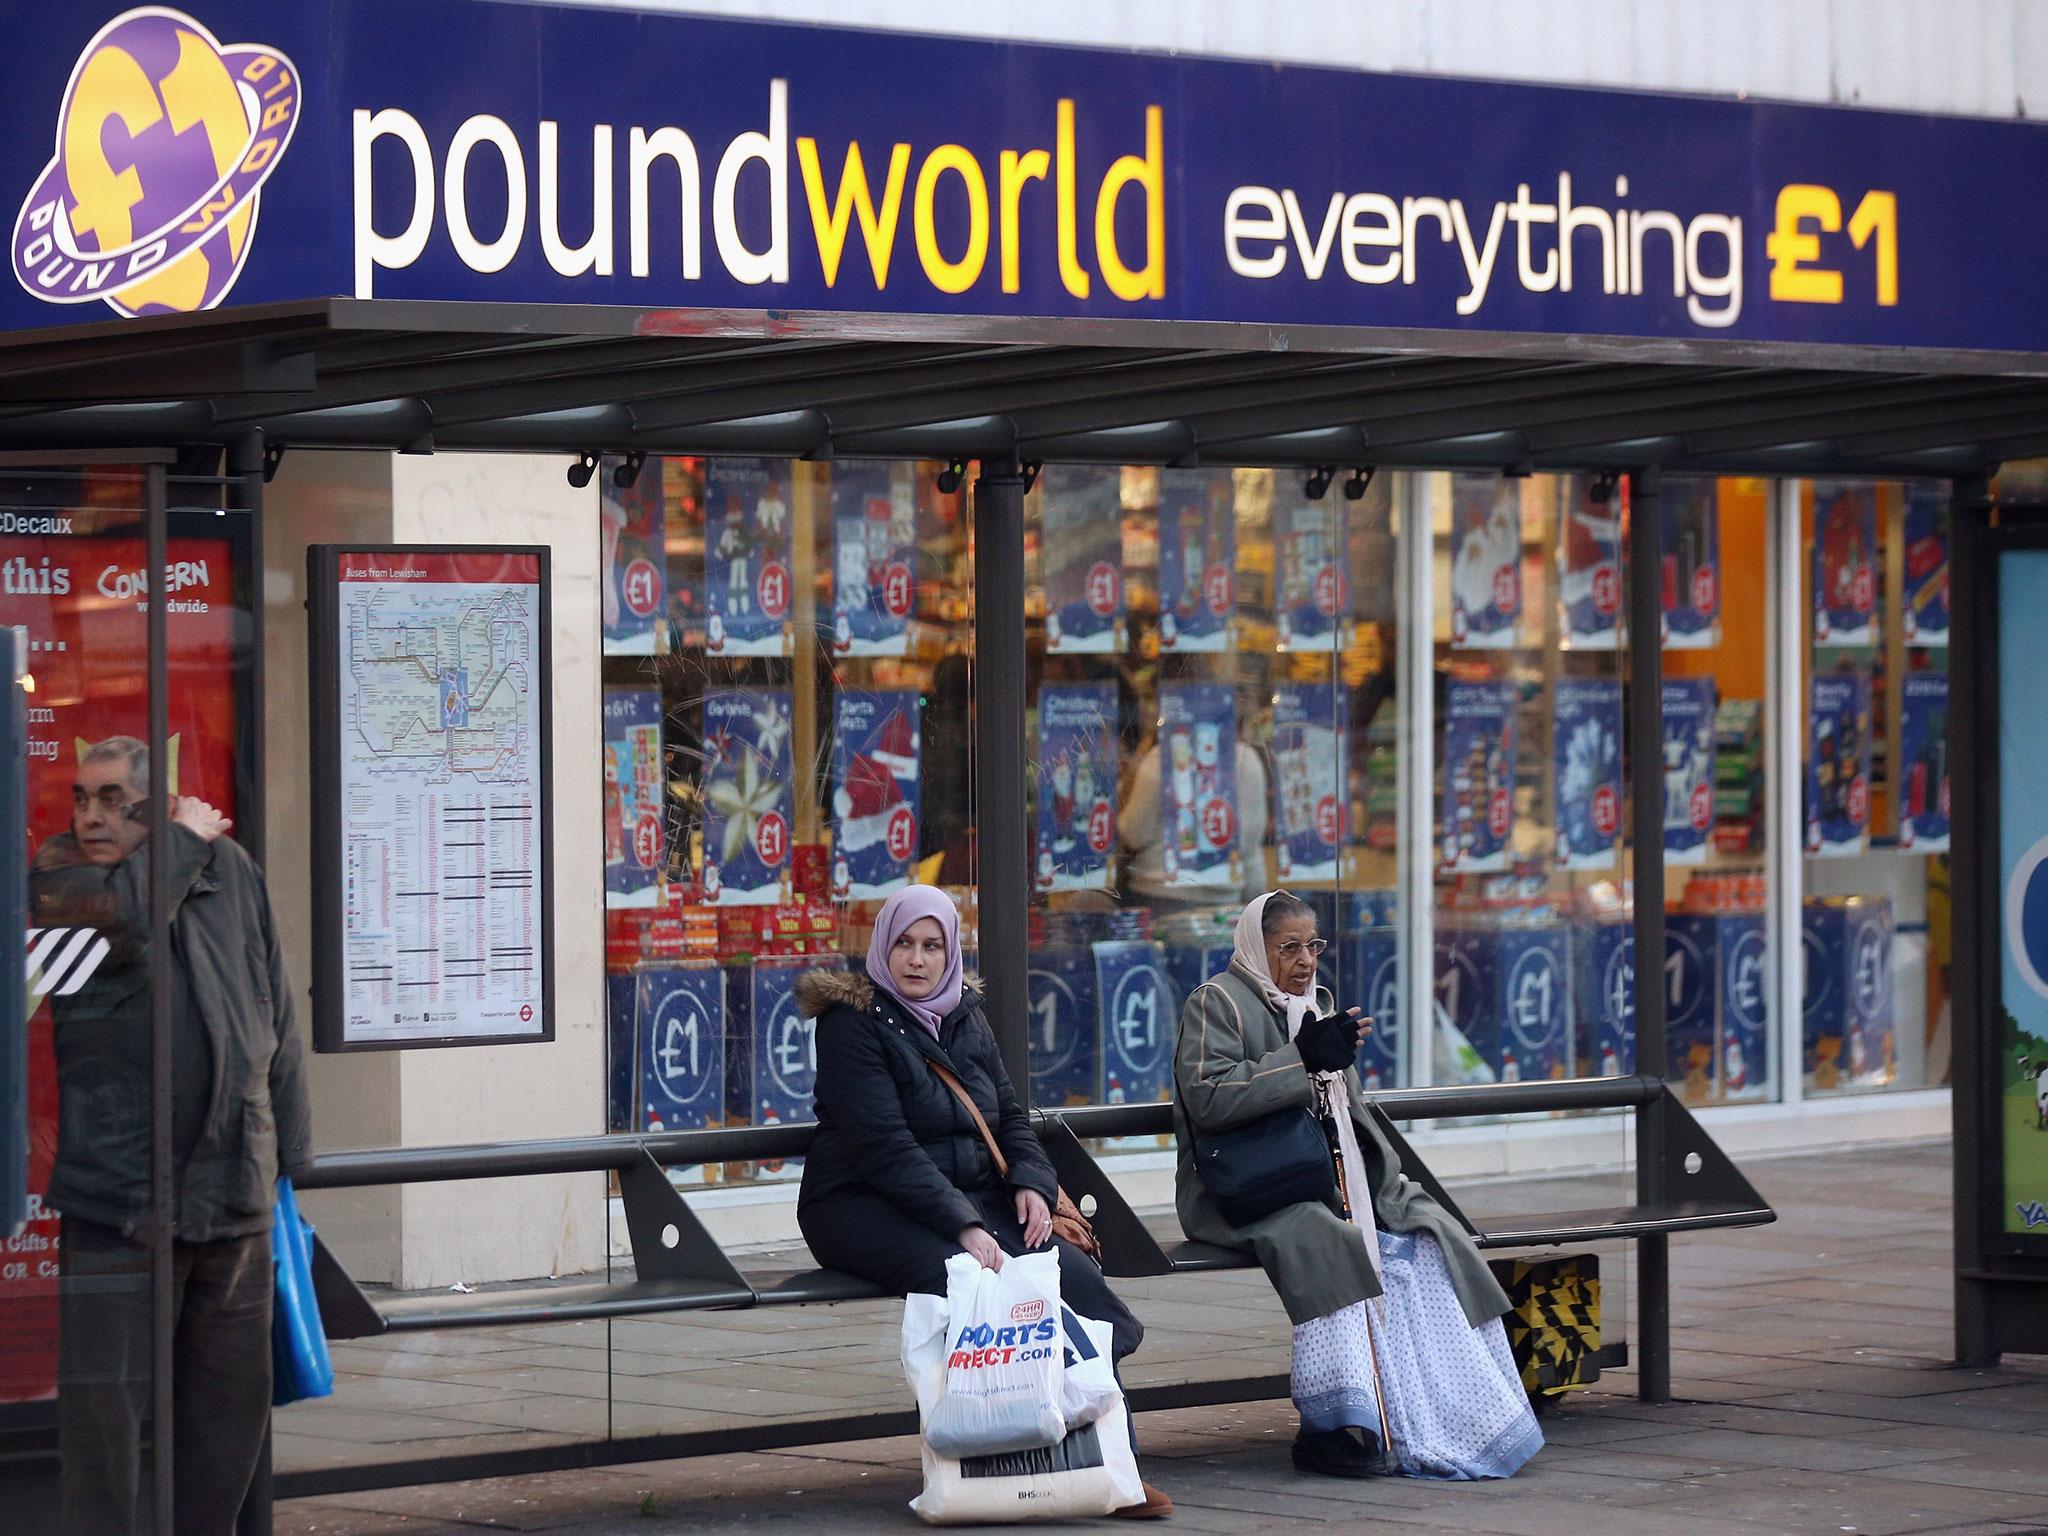 Poundworld’s owner had turned down offers to sell the company through a process known as a pre-pack